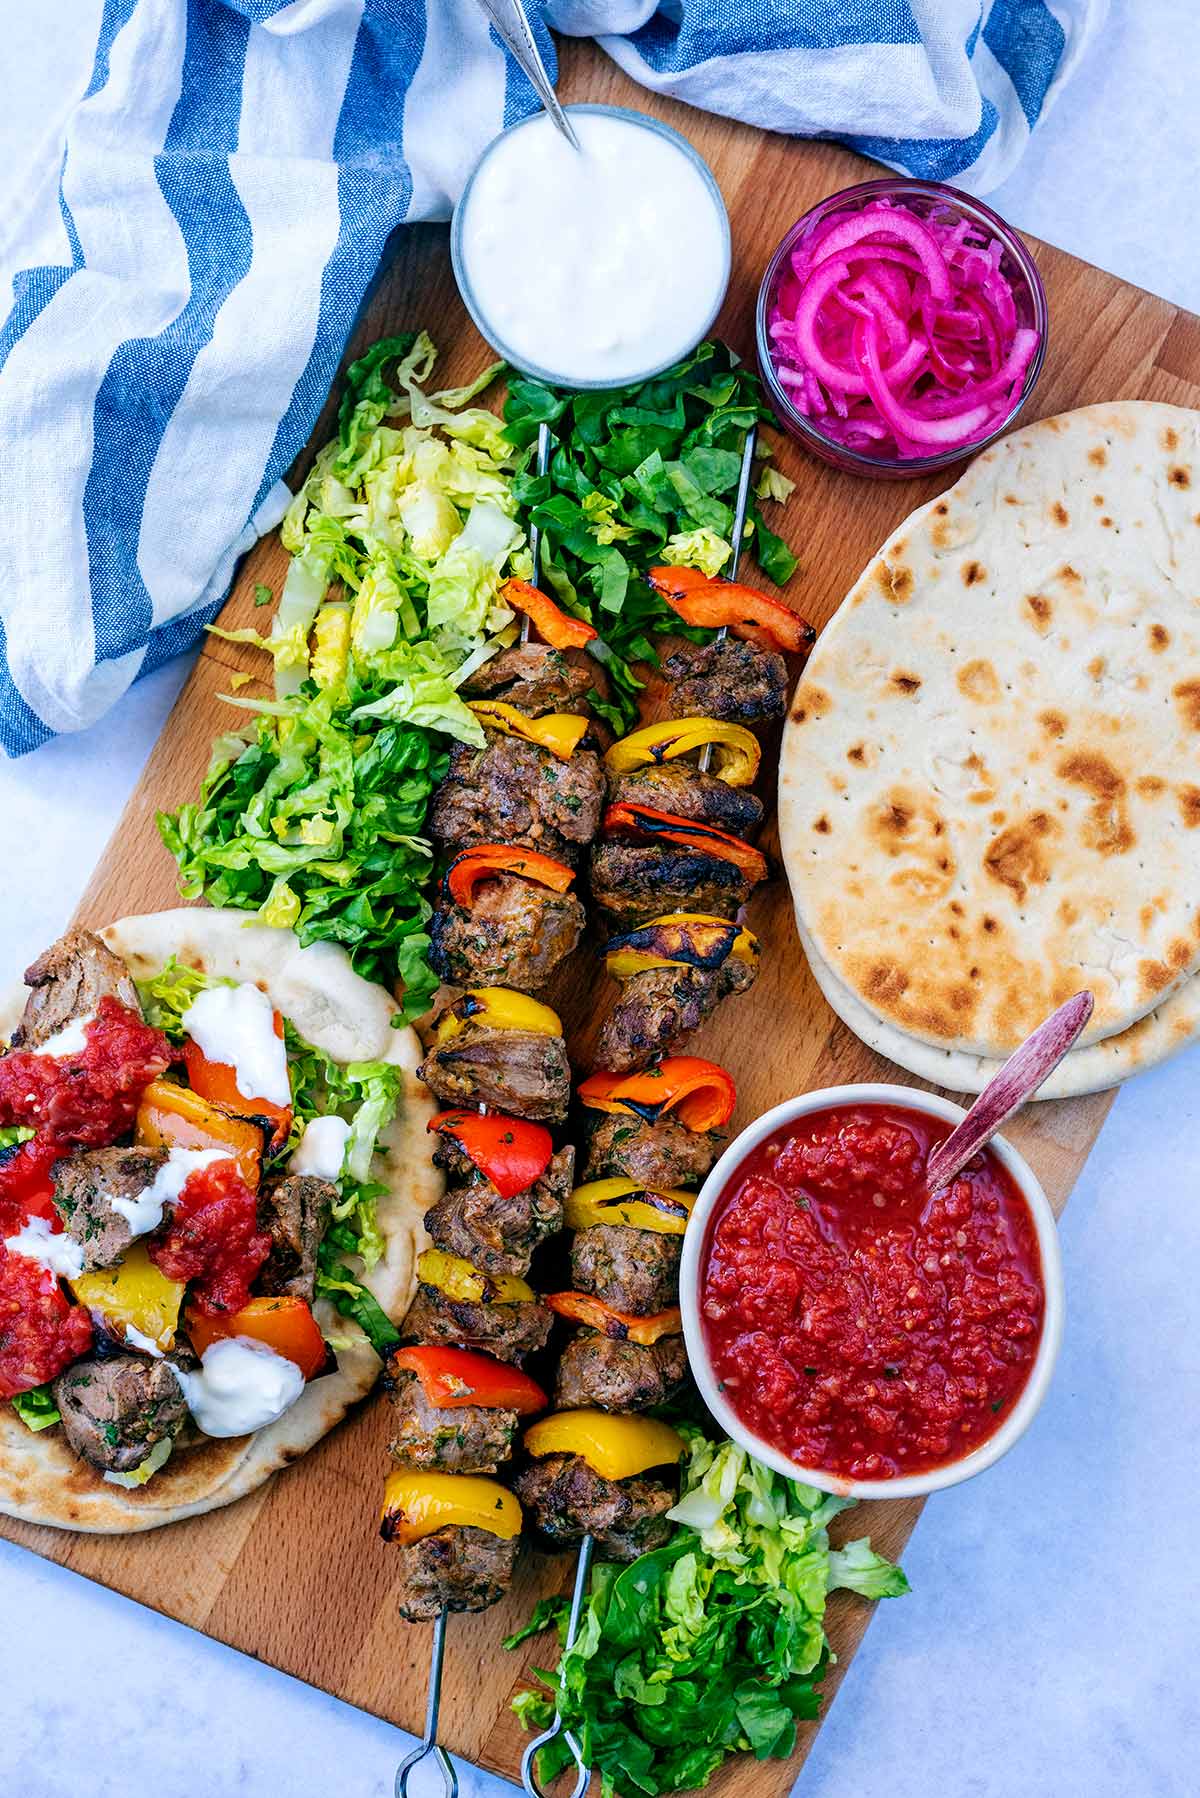 Two lamb kebab skewers on a serving board with flatbreads and sauces.